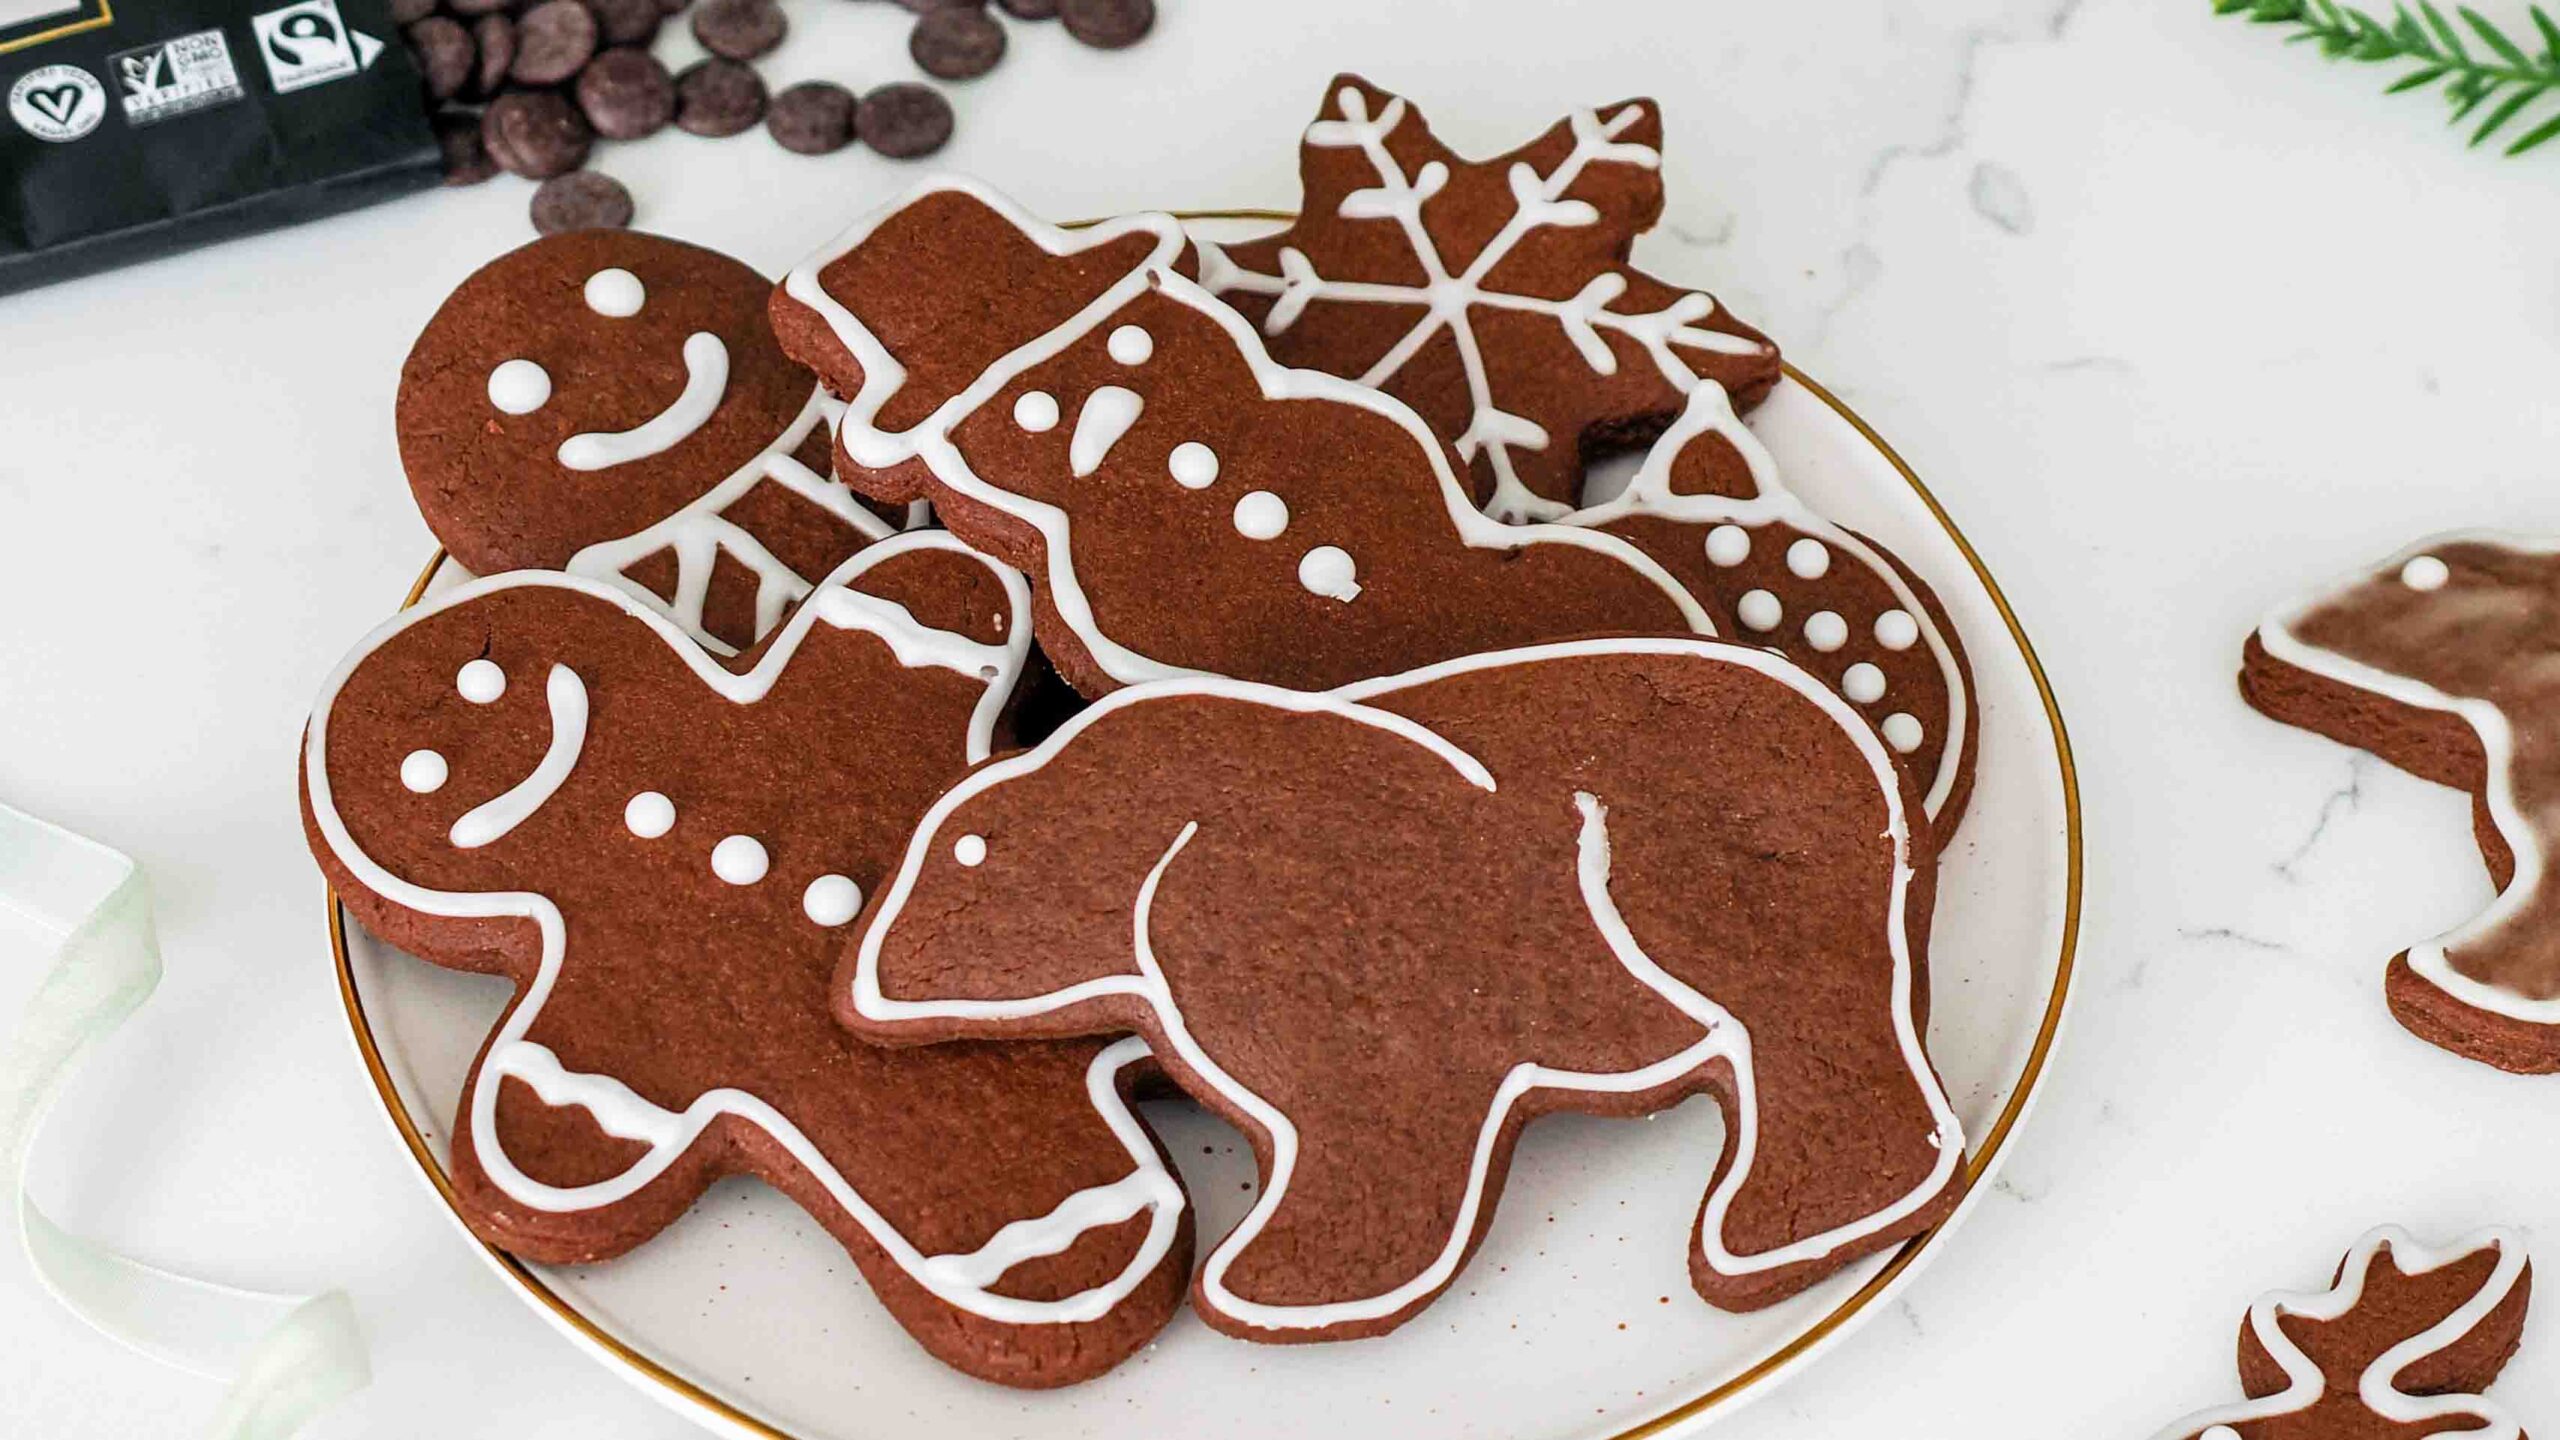 A pile of chocolate gingerbread cookies on a plate.